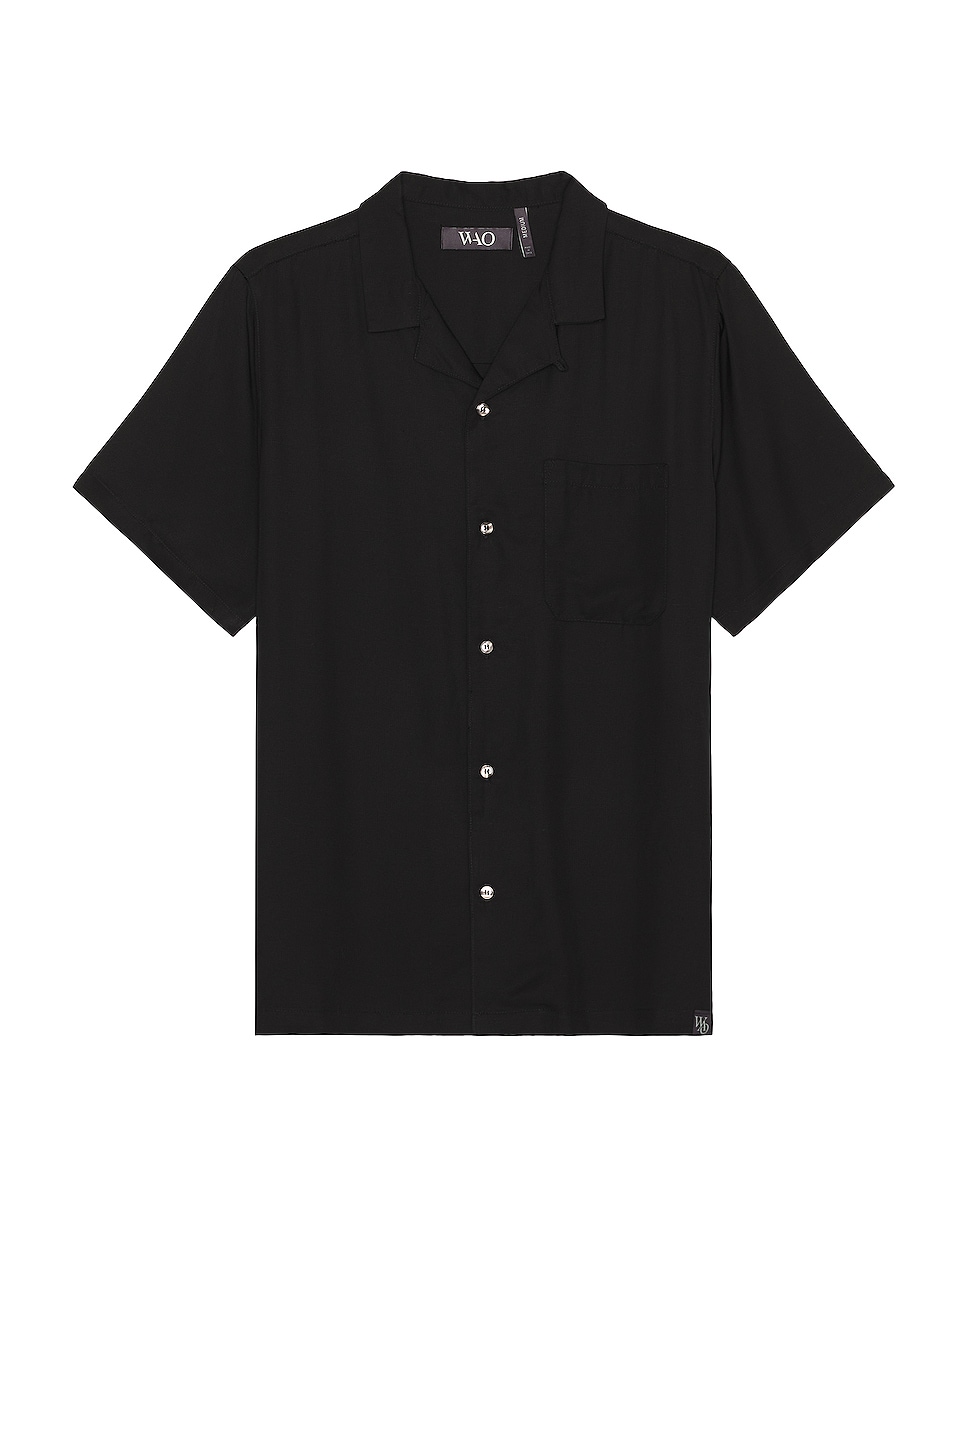 Image 1 of WAO The Camp Shirt in black